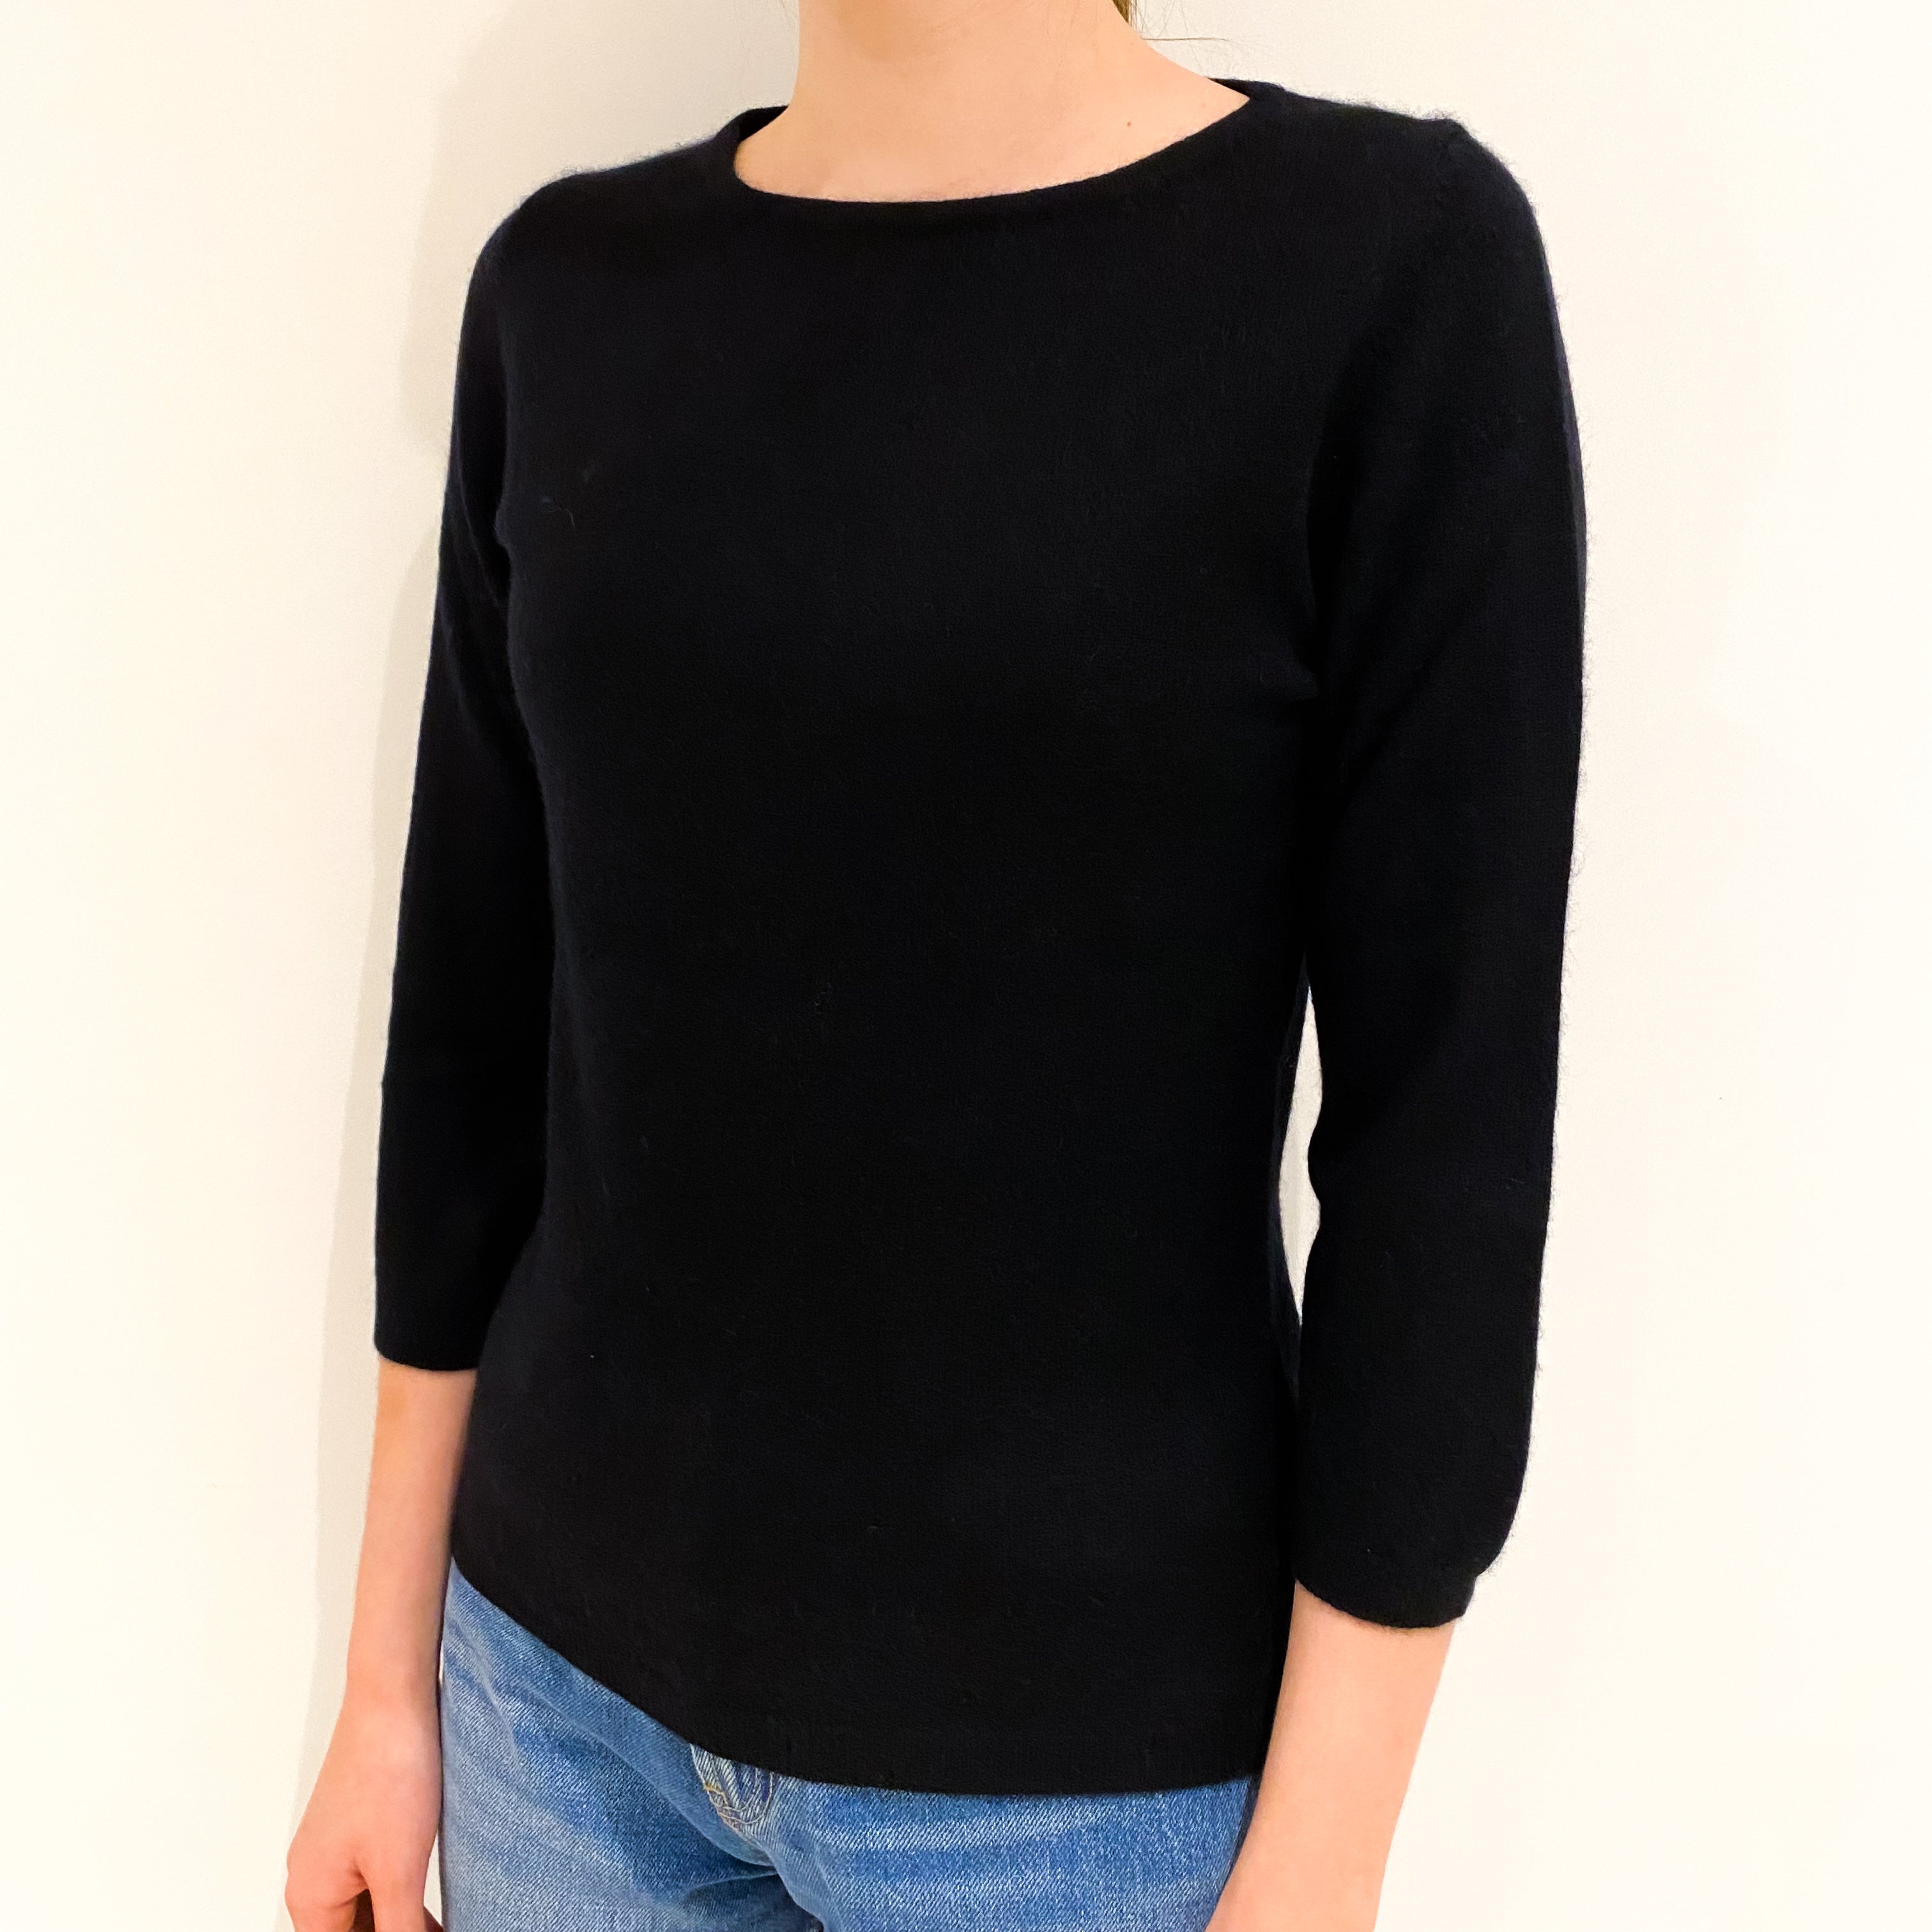 Black 3/4 Sleeved Cashmere Crew Neck Jumper Extra Small